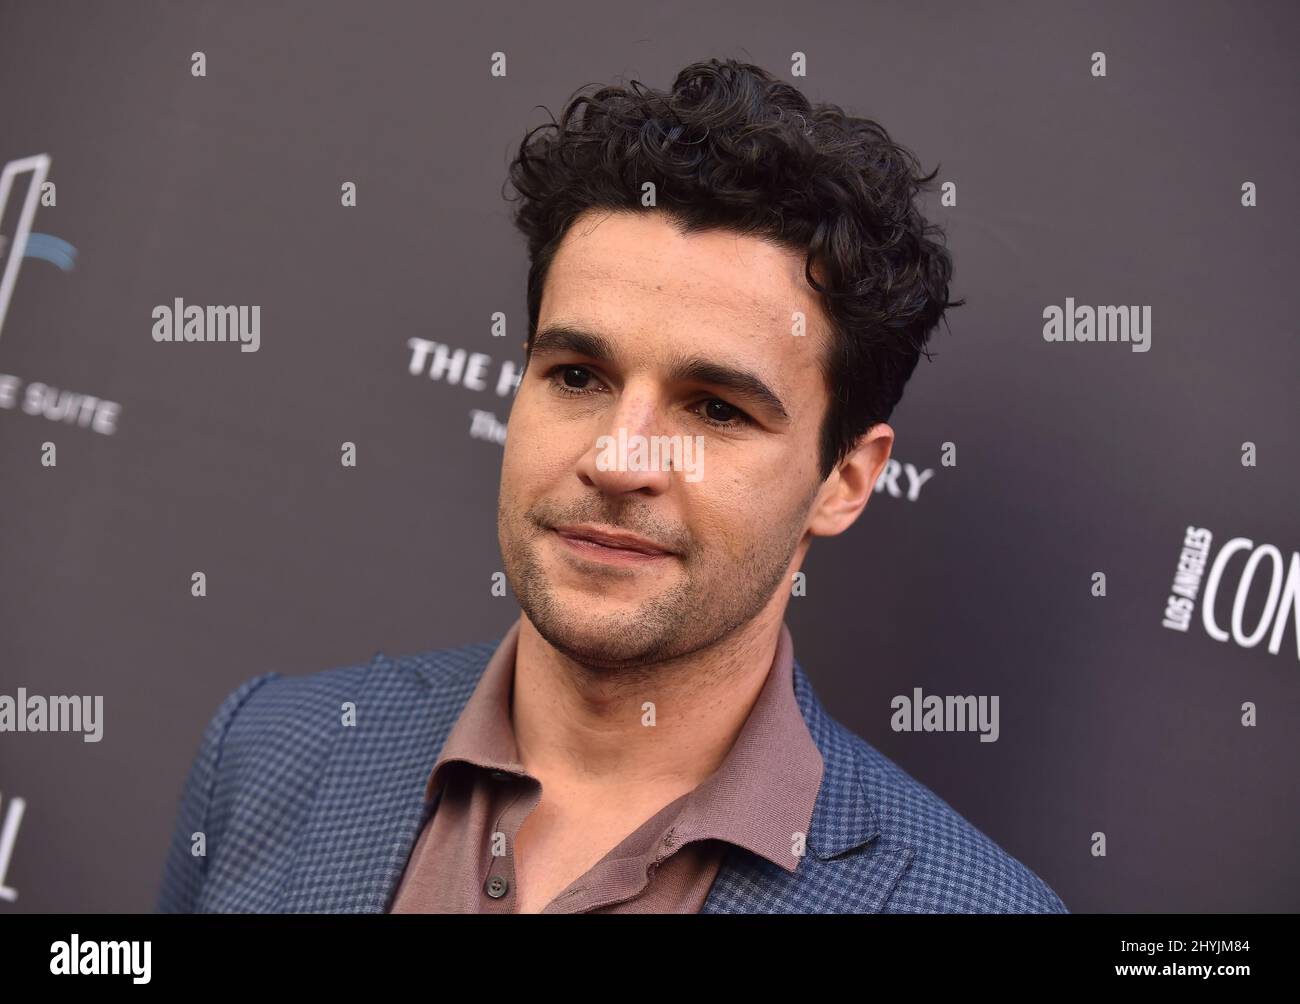 Christopher Abbott arriving at the 'Below the Line Talent' FYC Event hosted by LA Confidential at The LINE Hotel on June 09, 2019 in Los Angeles, CA Stock Photo